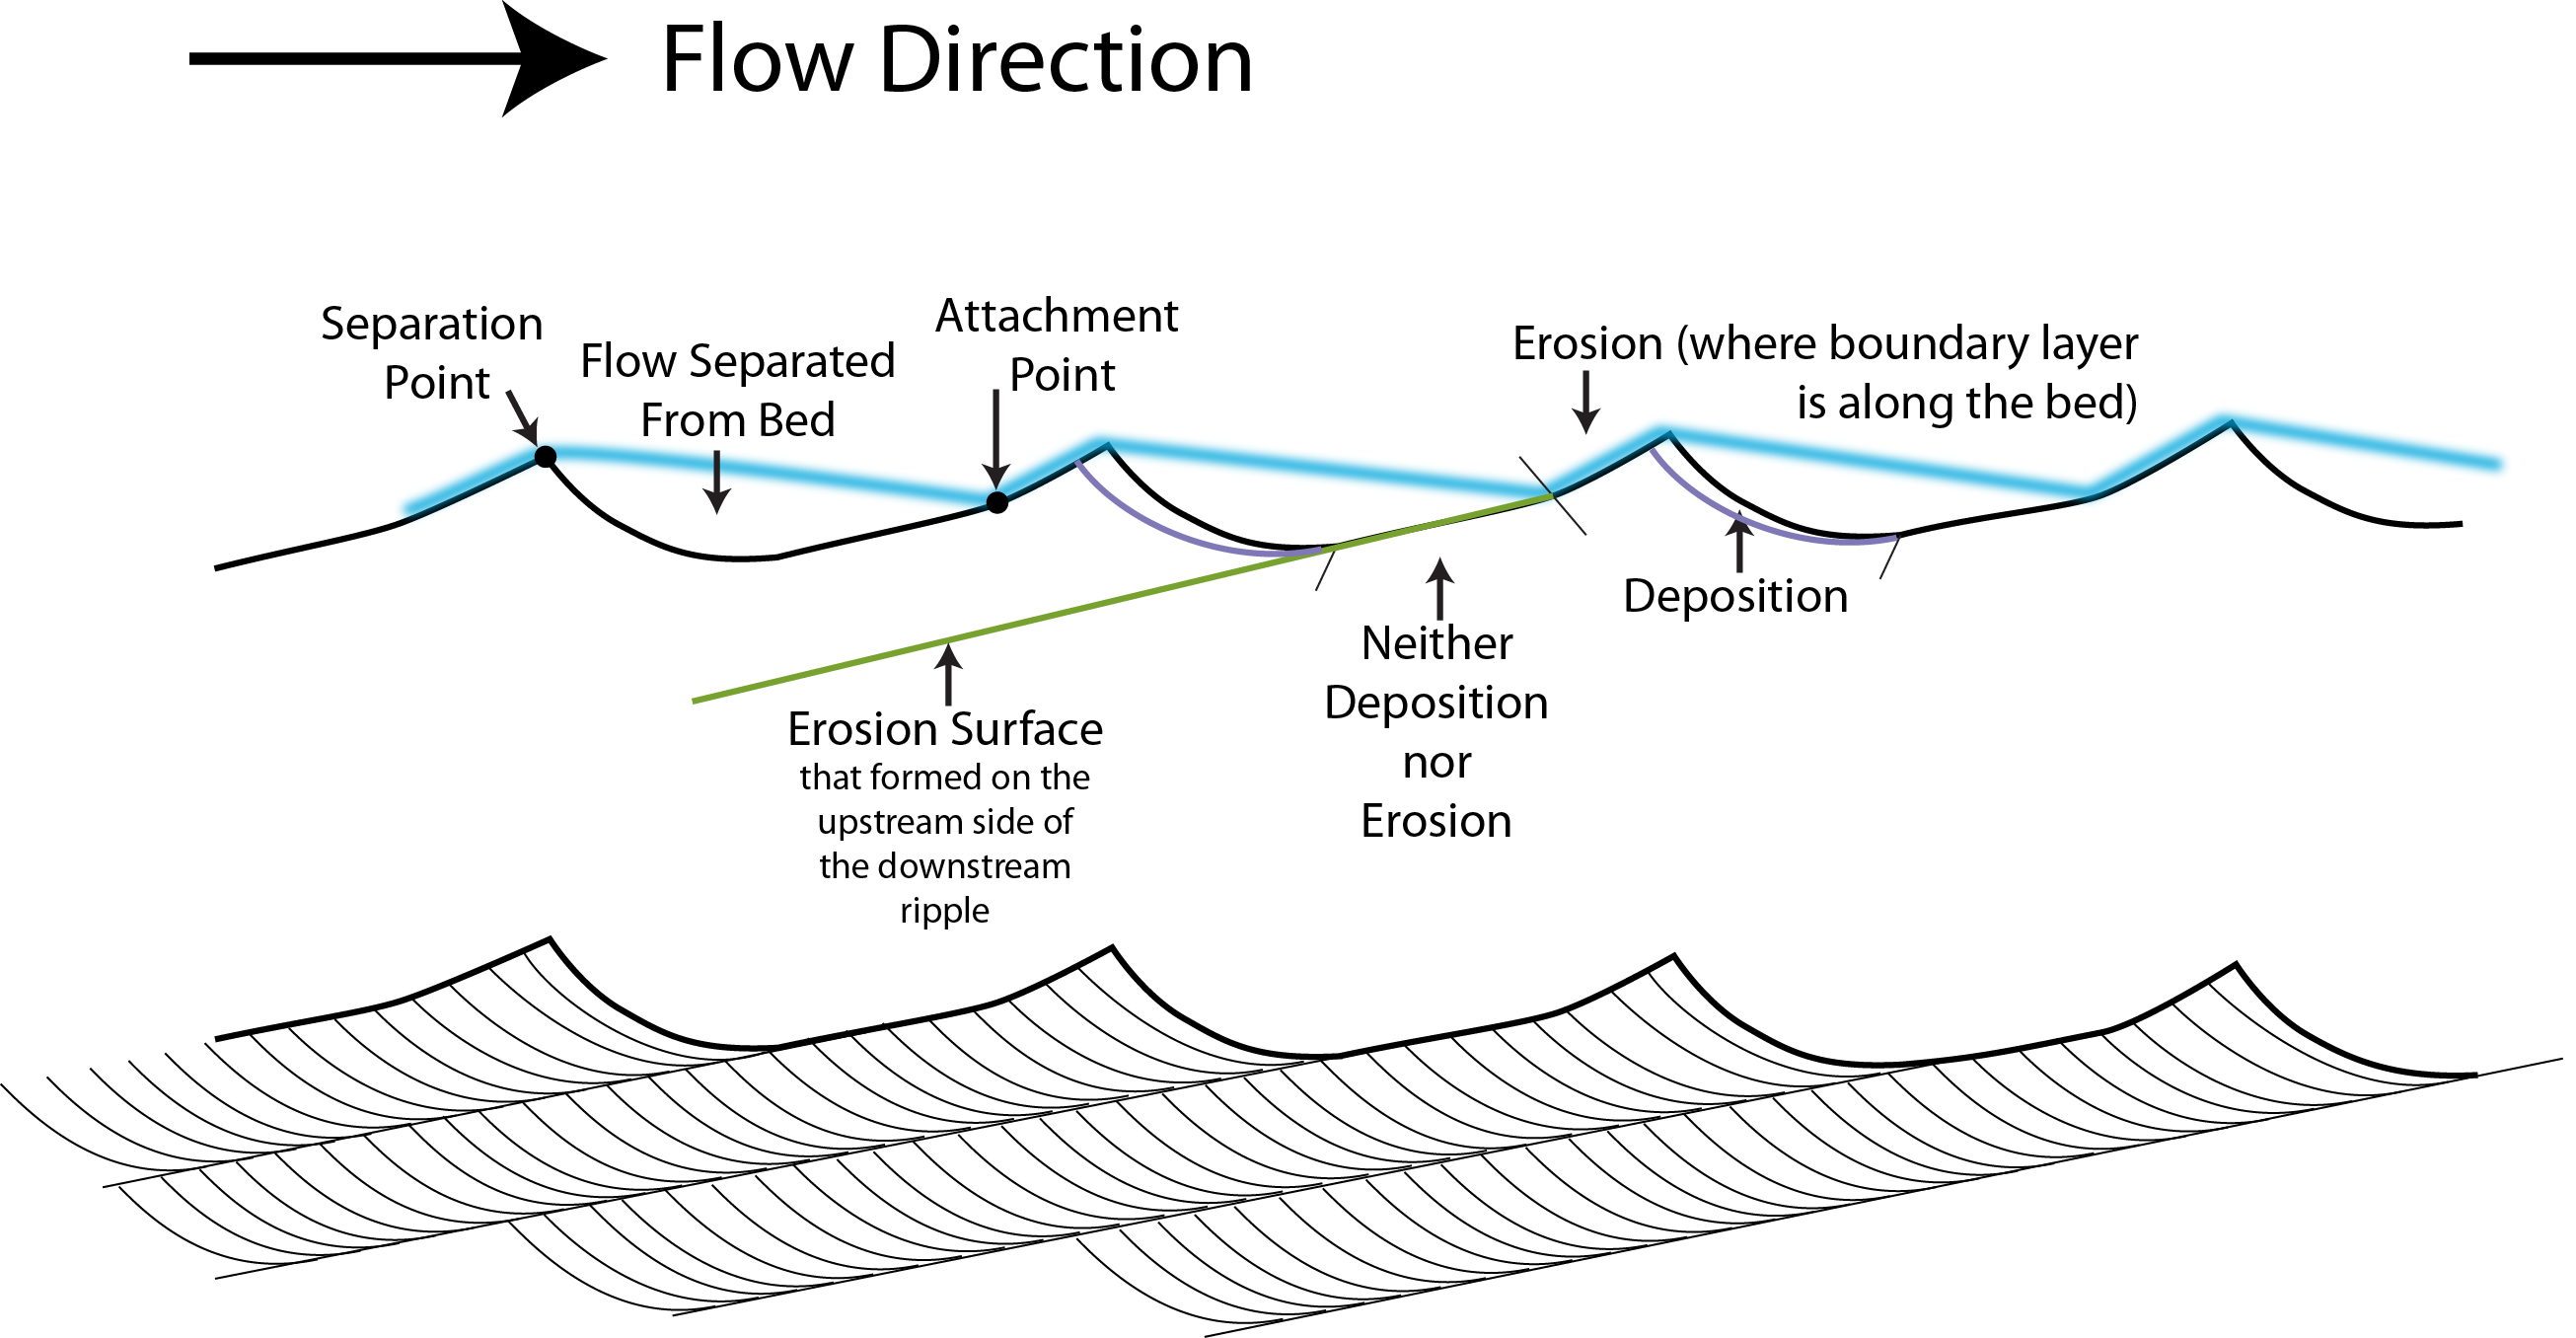 Sketch of a ripple and the geometry of the flow over it, including the separation and attachment points, the zone of flow separation, where erosion and deposition occur, and the resulting cross lamination.